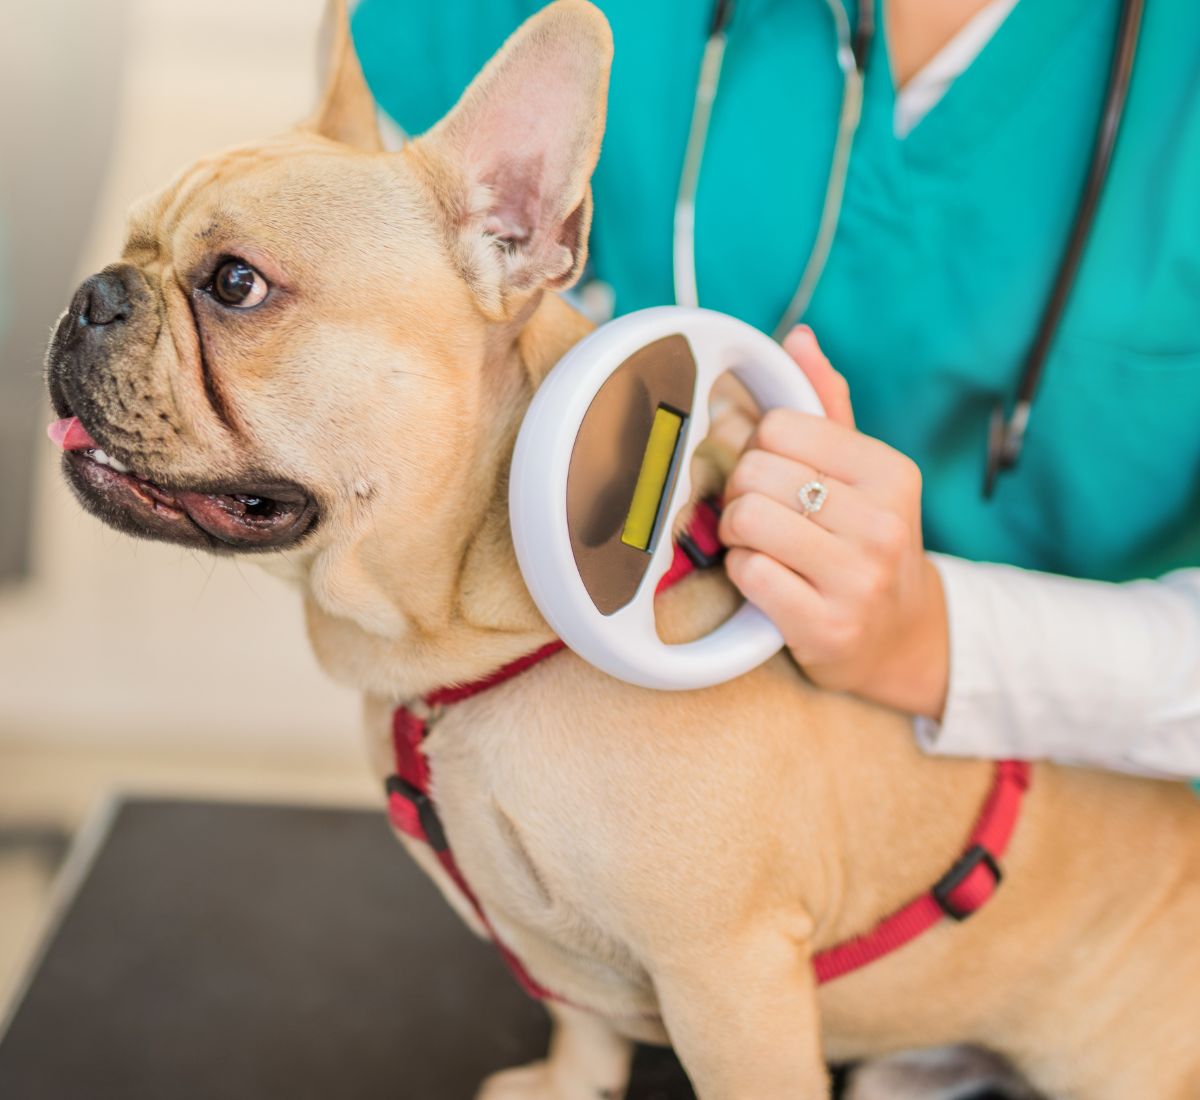 veterinarian scanning microchip on a dog